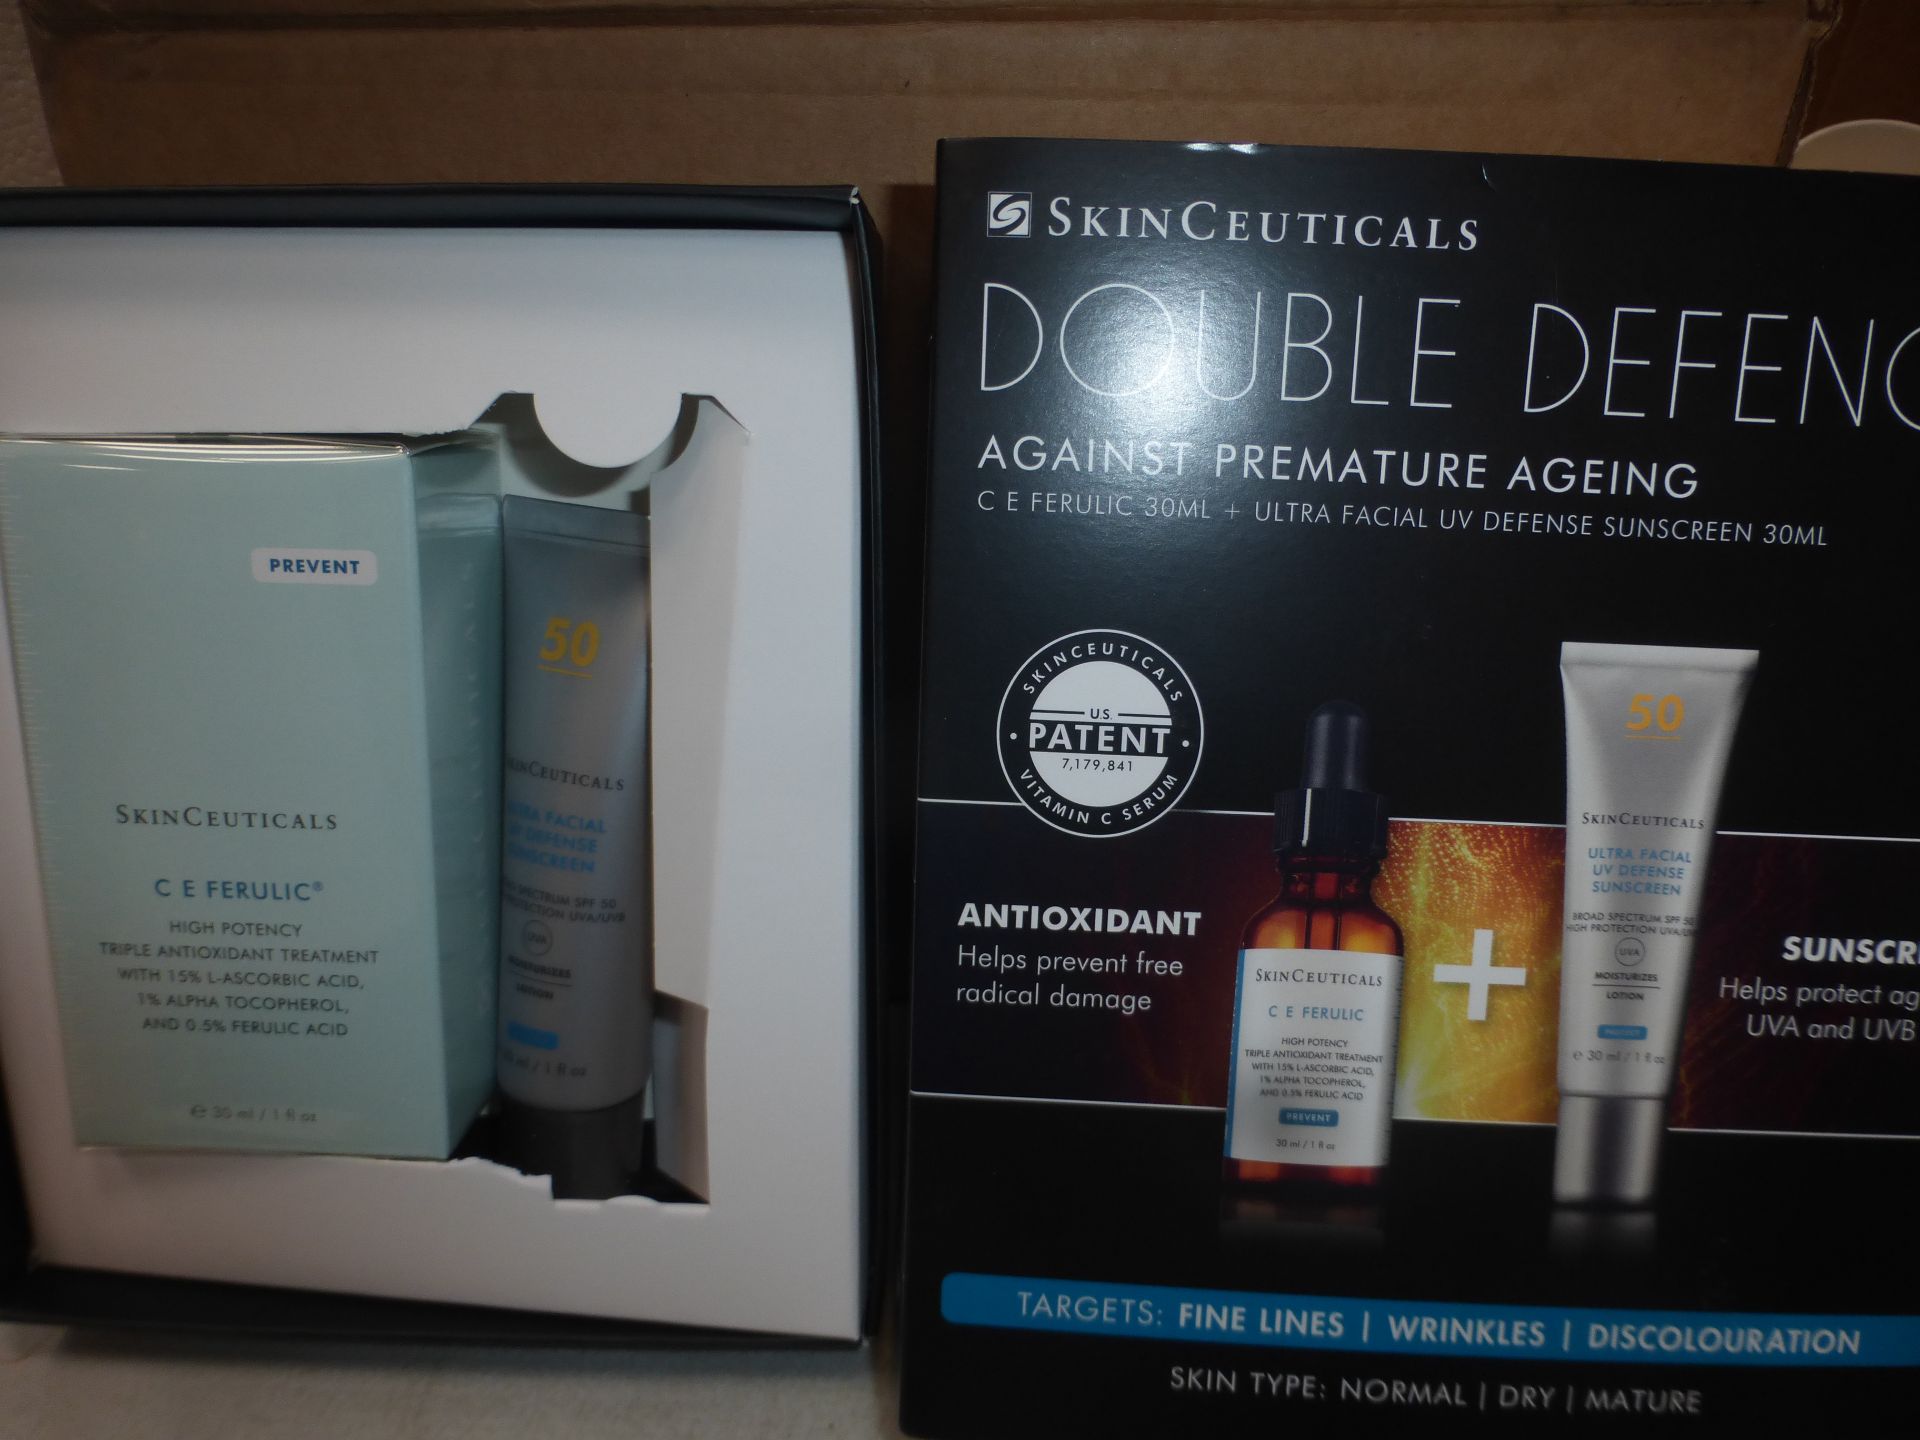 1 x SkinCeuticals Double Defence set - new in box (C12A)